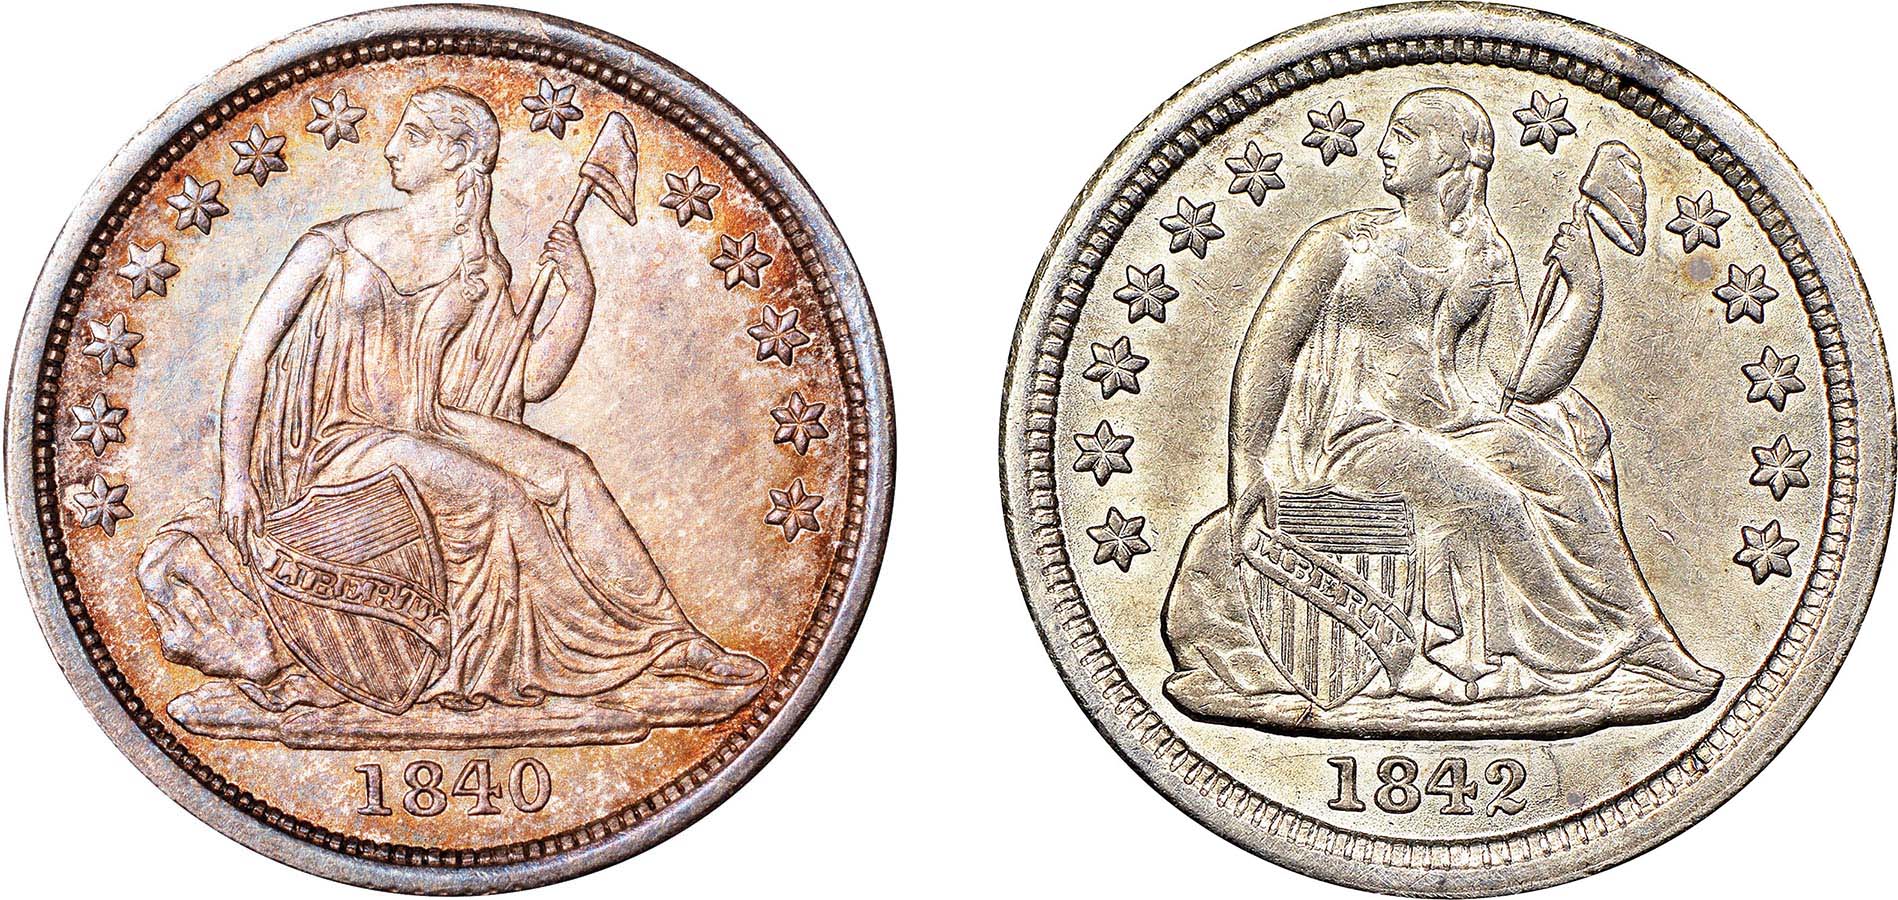 A comparison between the 1840 and 1842 Gobrecht's Seated Liberty dime.